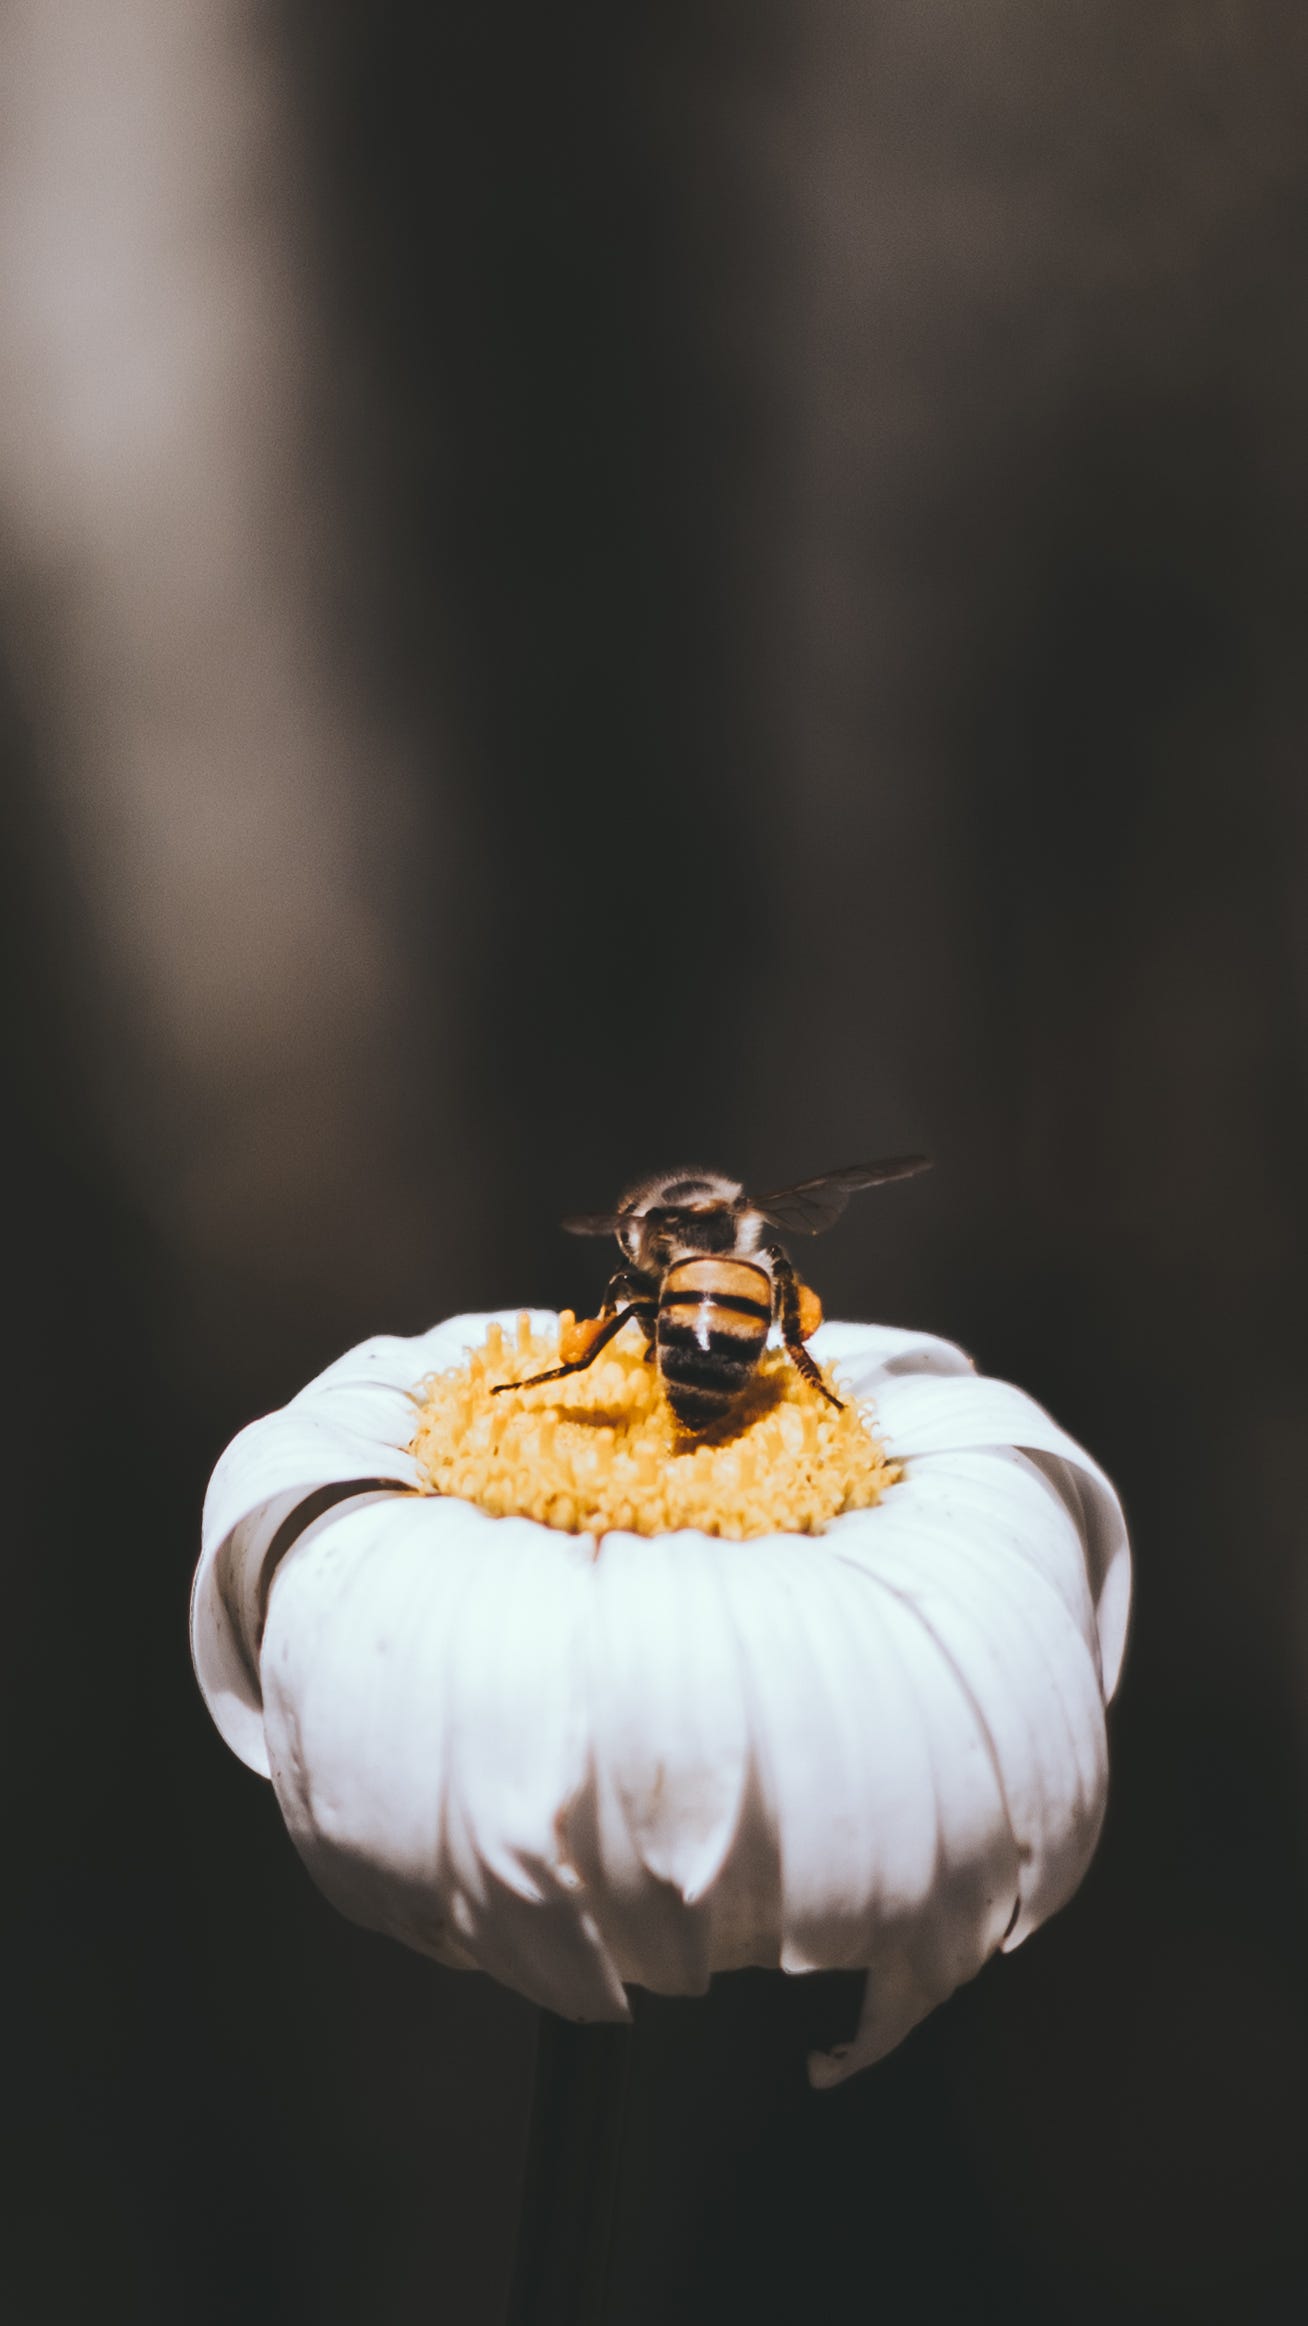 Bee standing on top of a white flower carrying pollen on its legs.